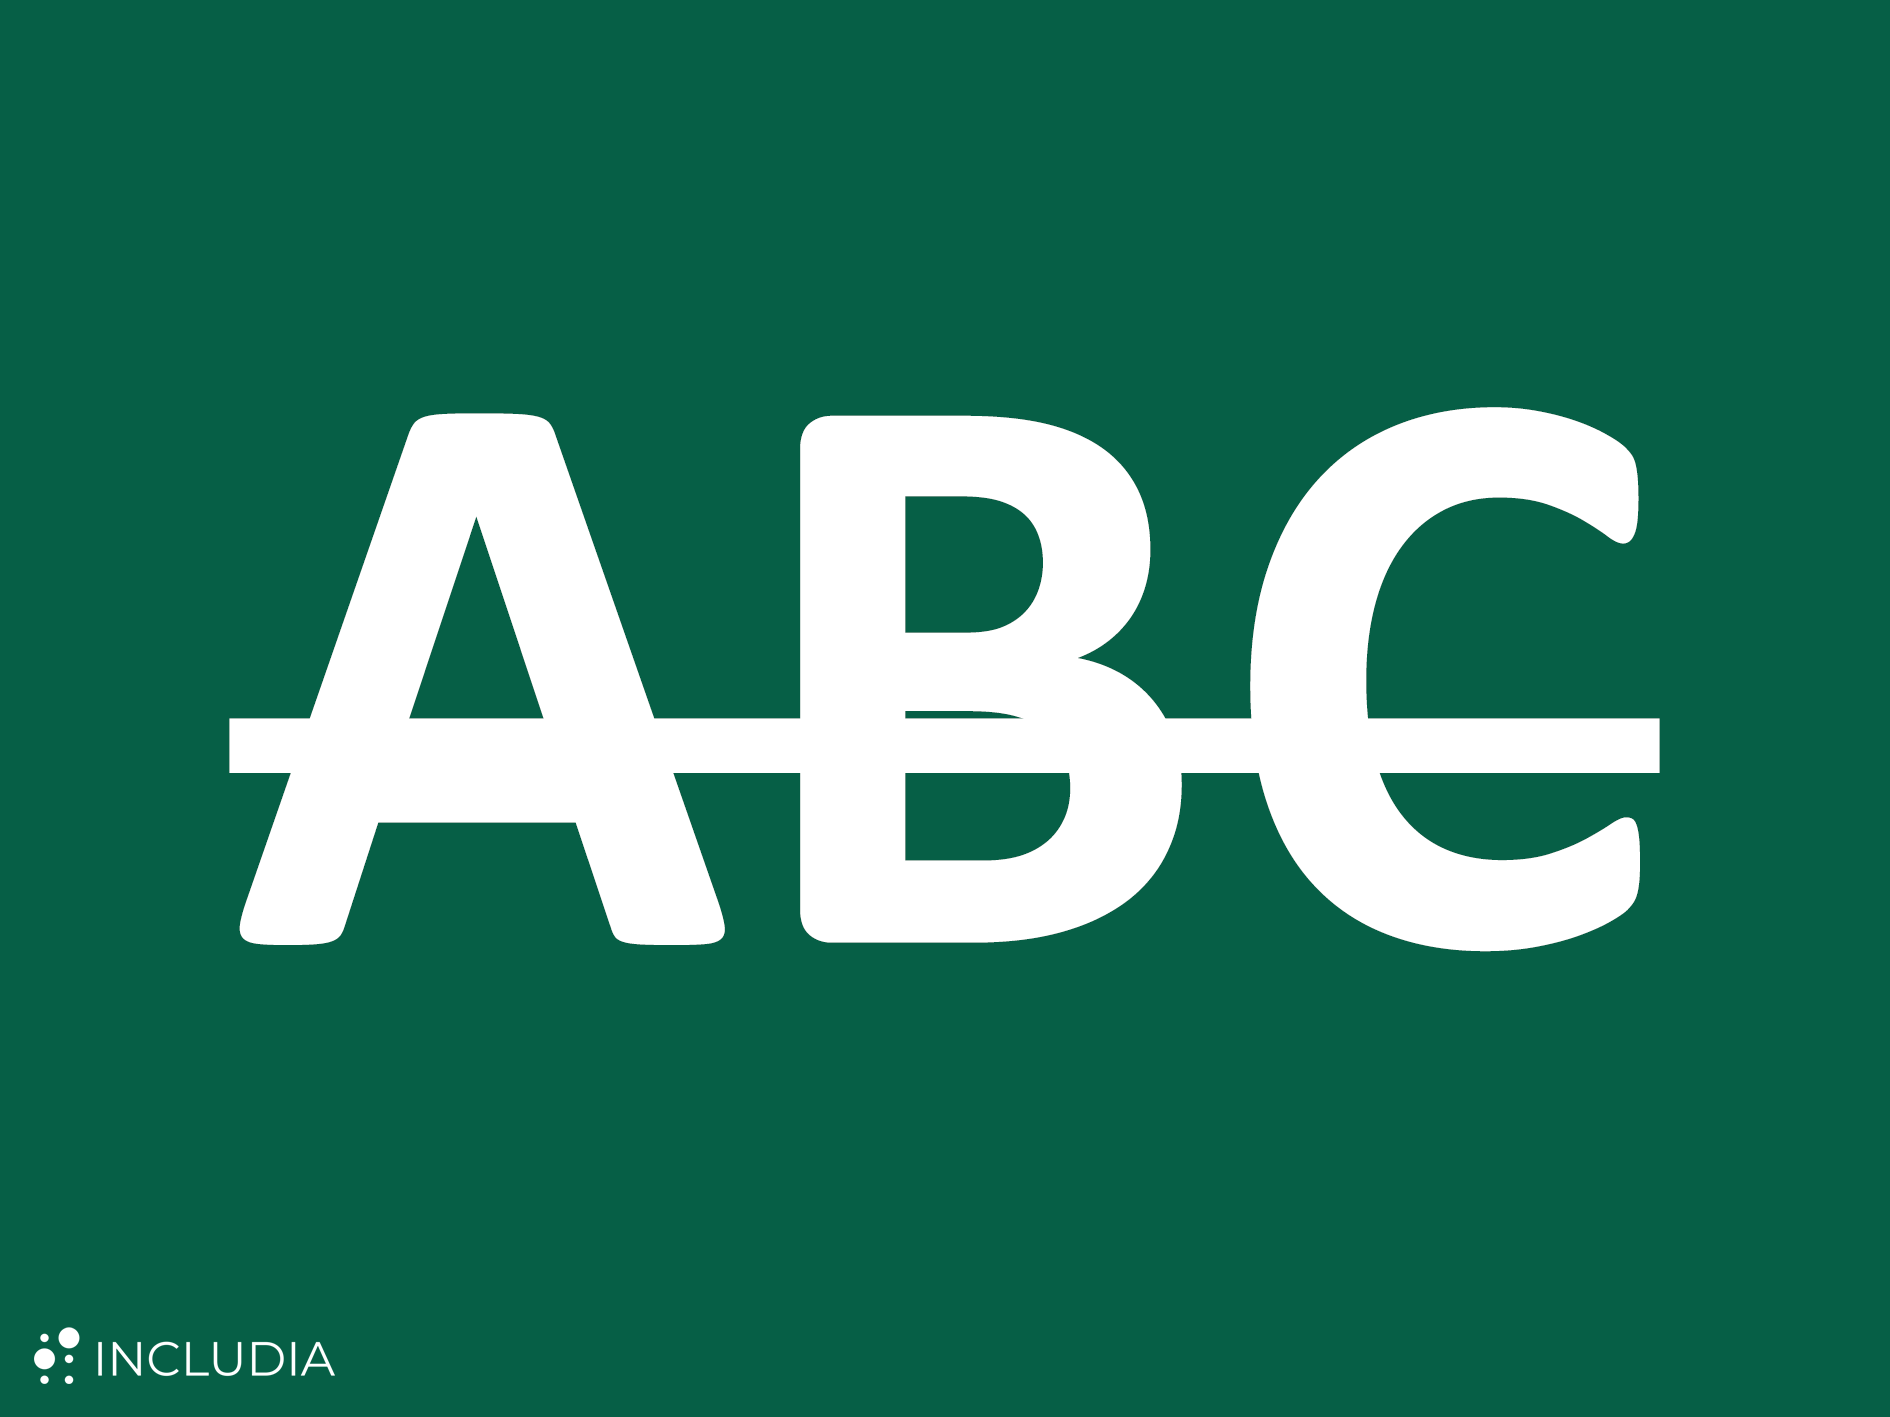 strikethrough letters A,B and C on a green background